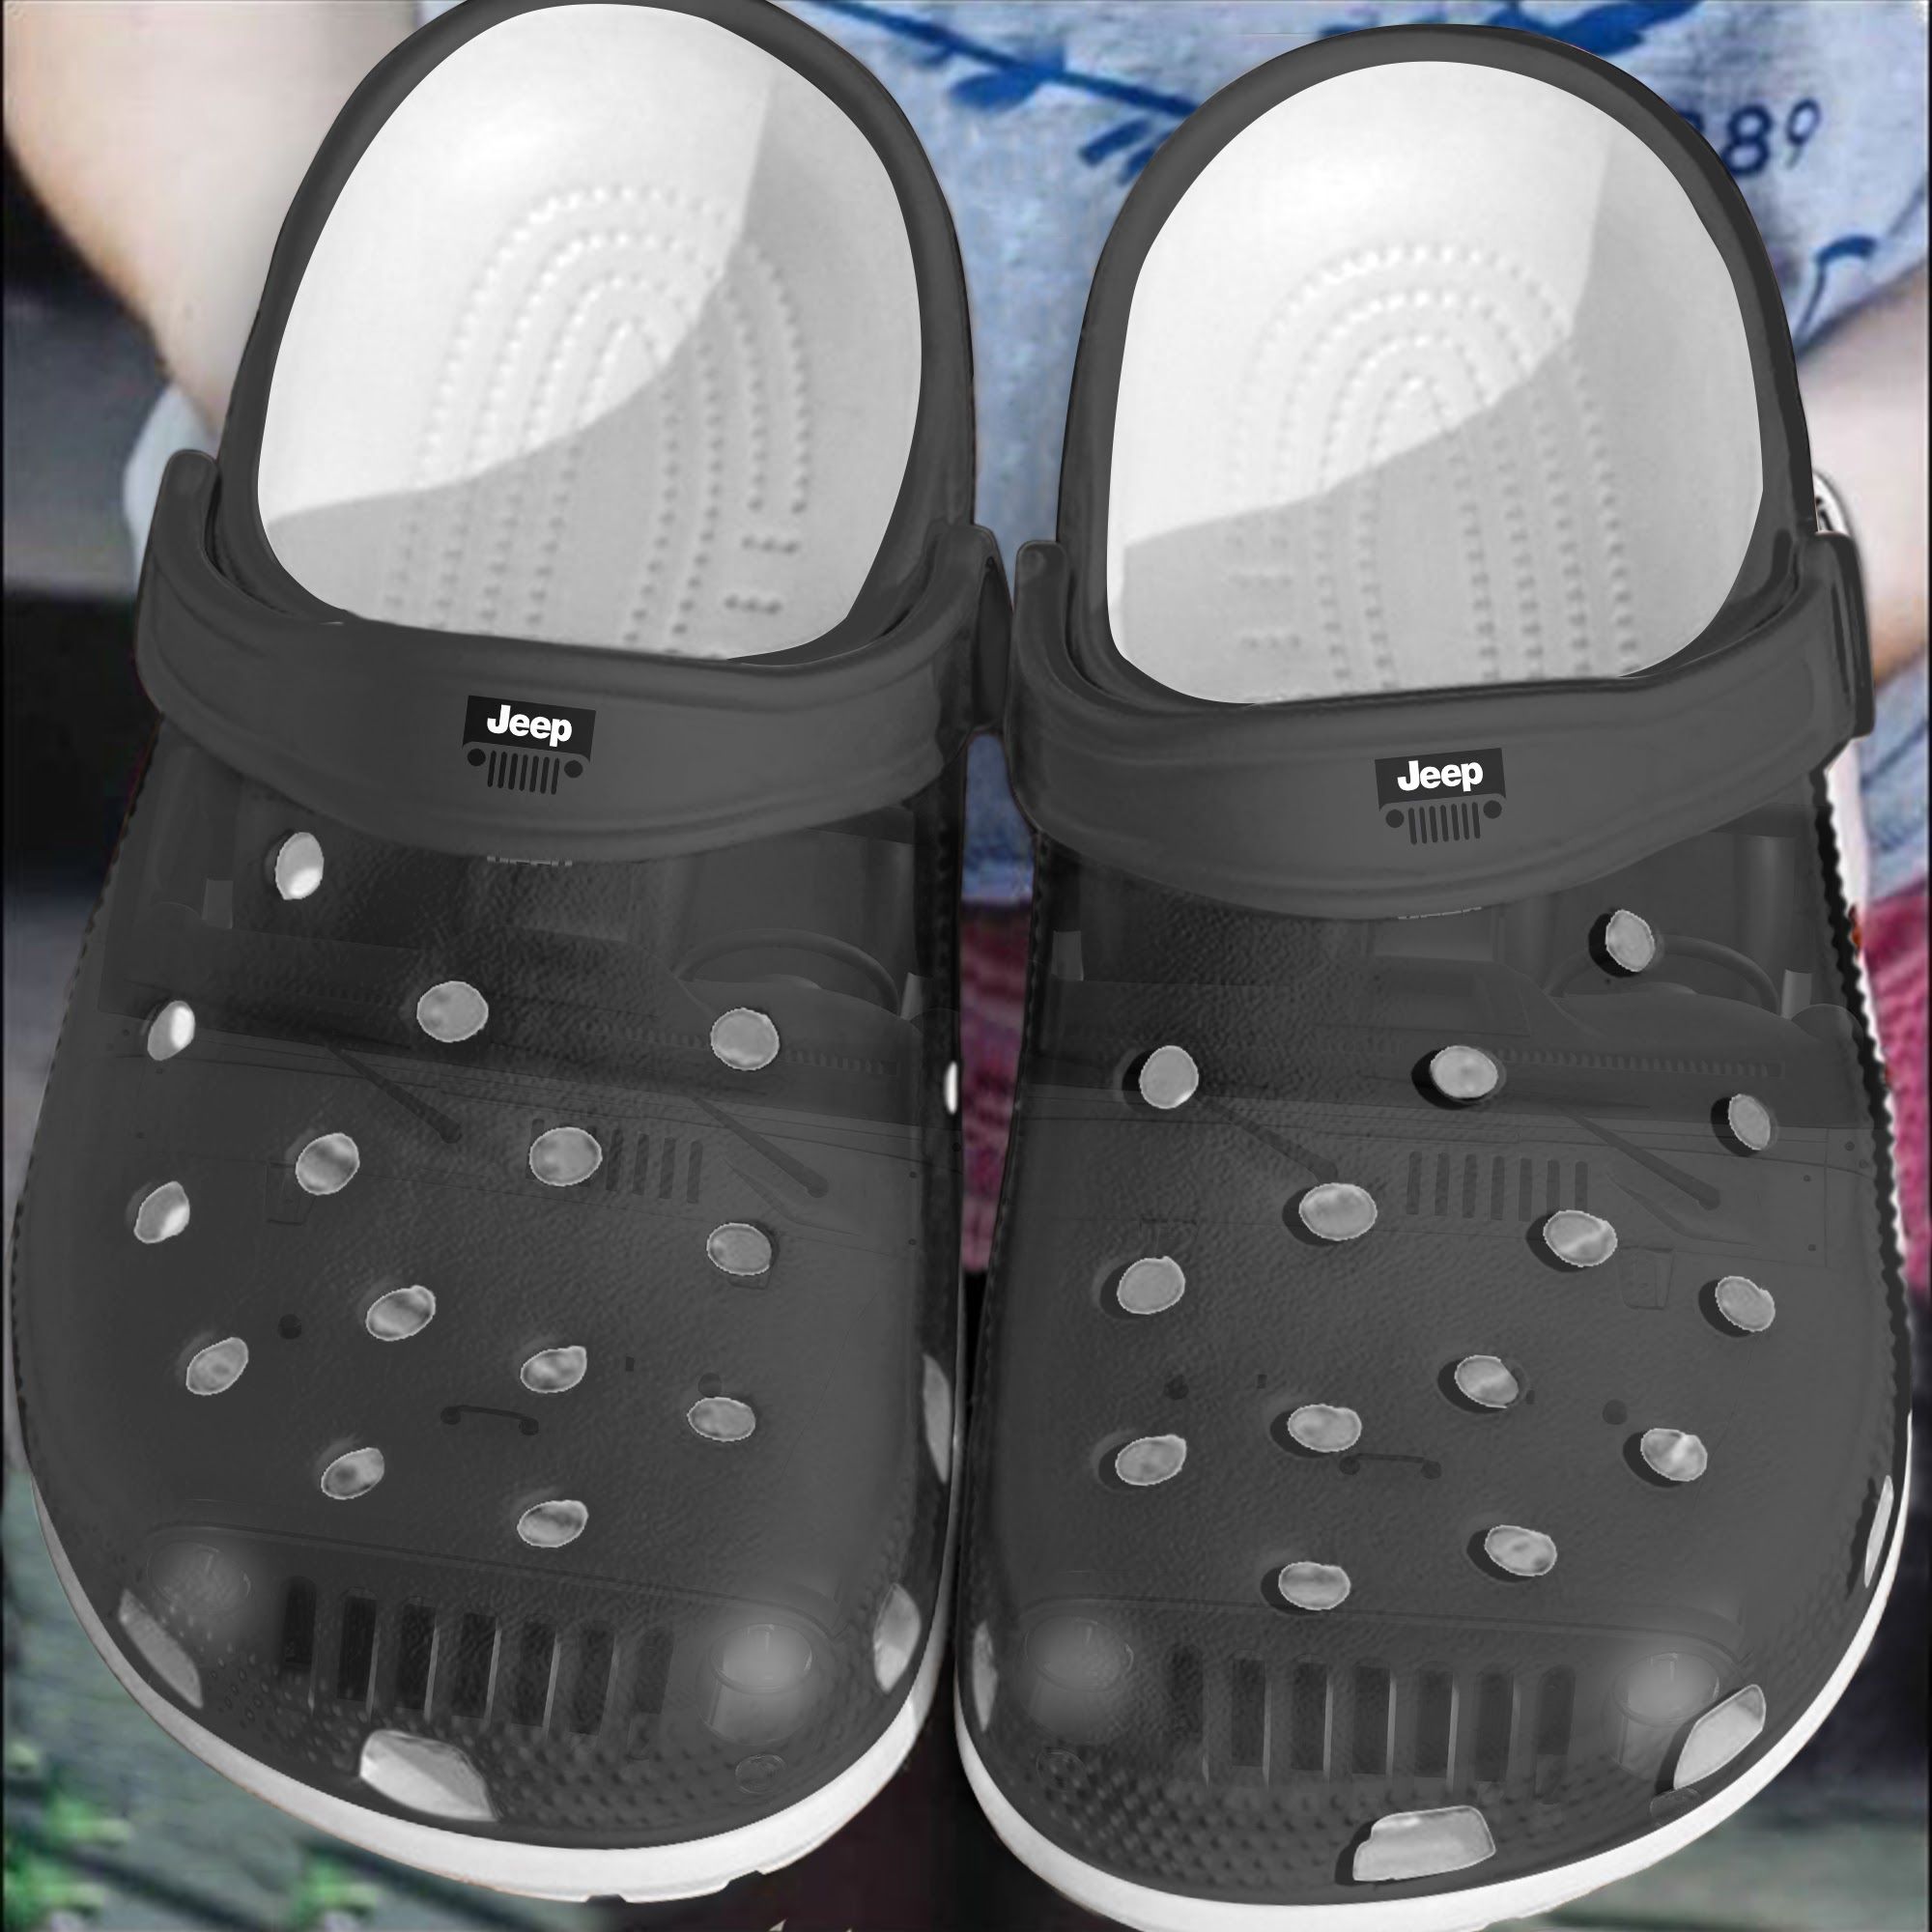 Find yourself a super cute Crocs shoe or give it as a gift 158